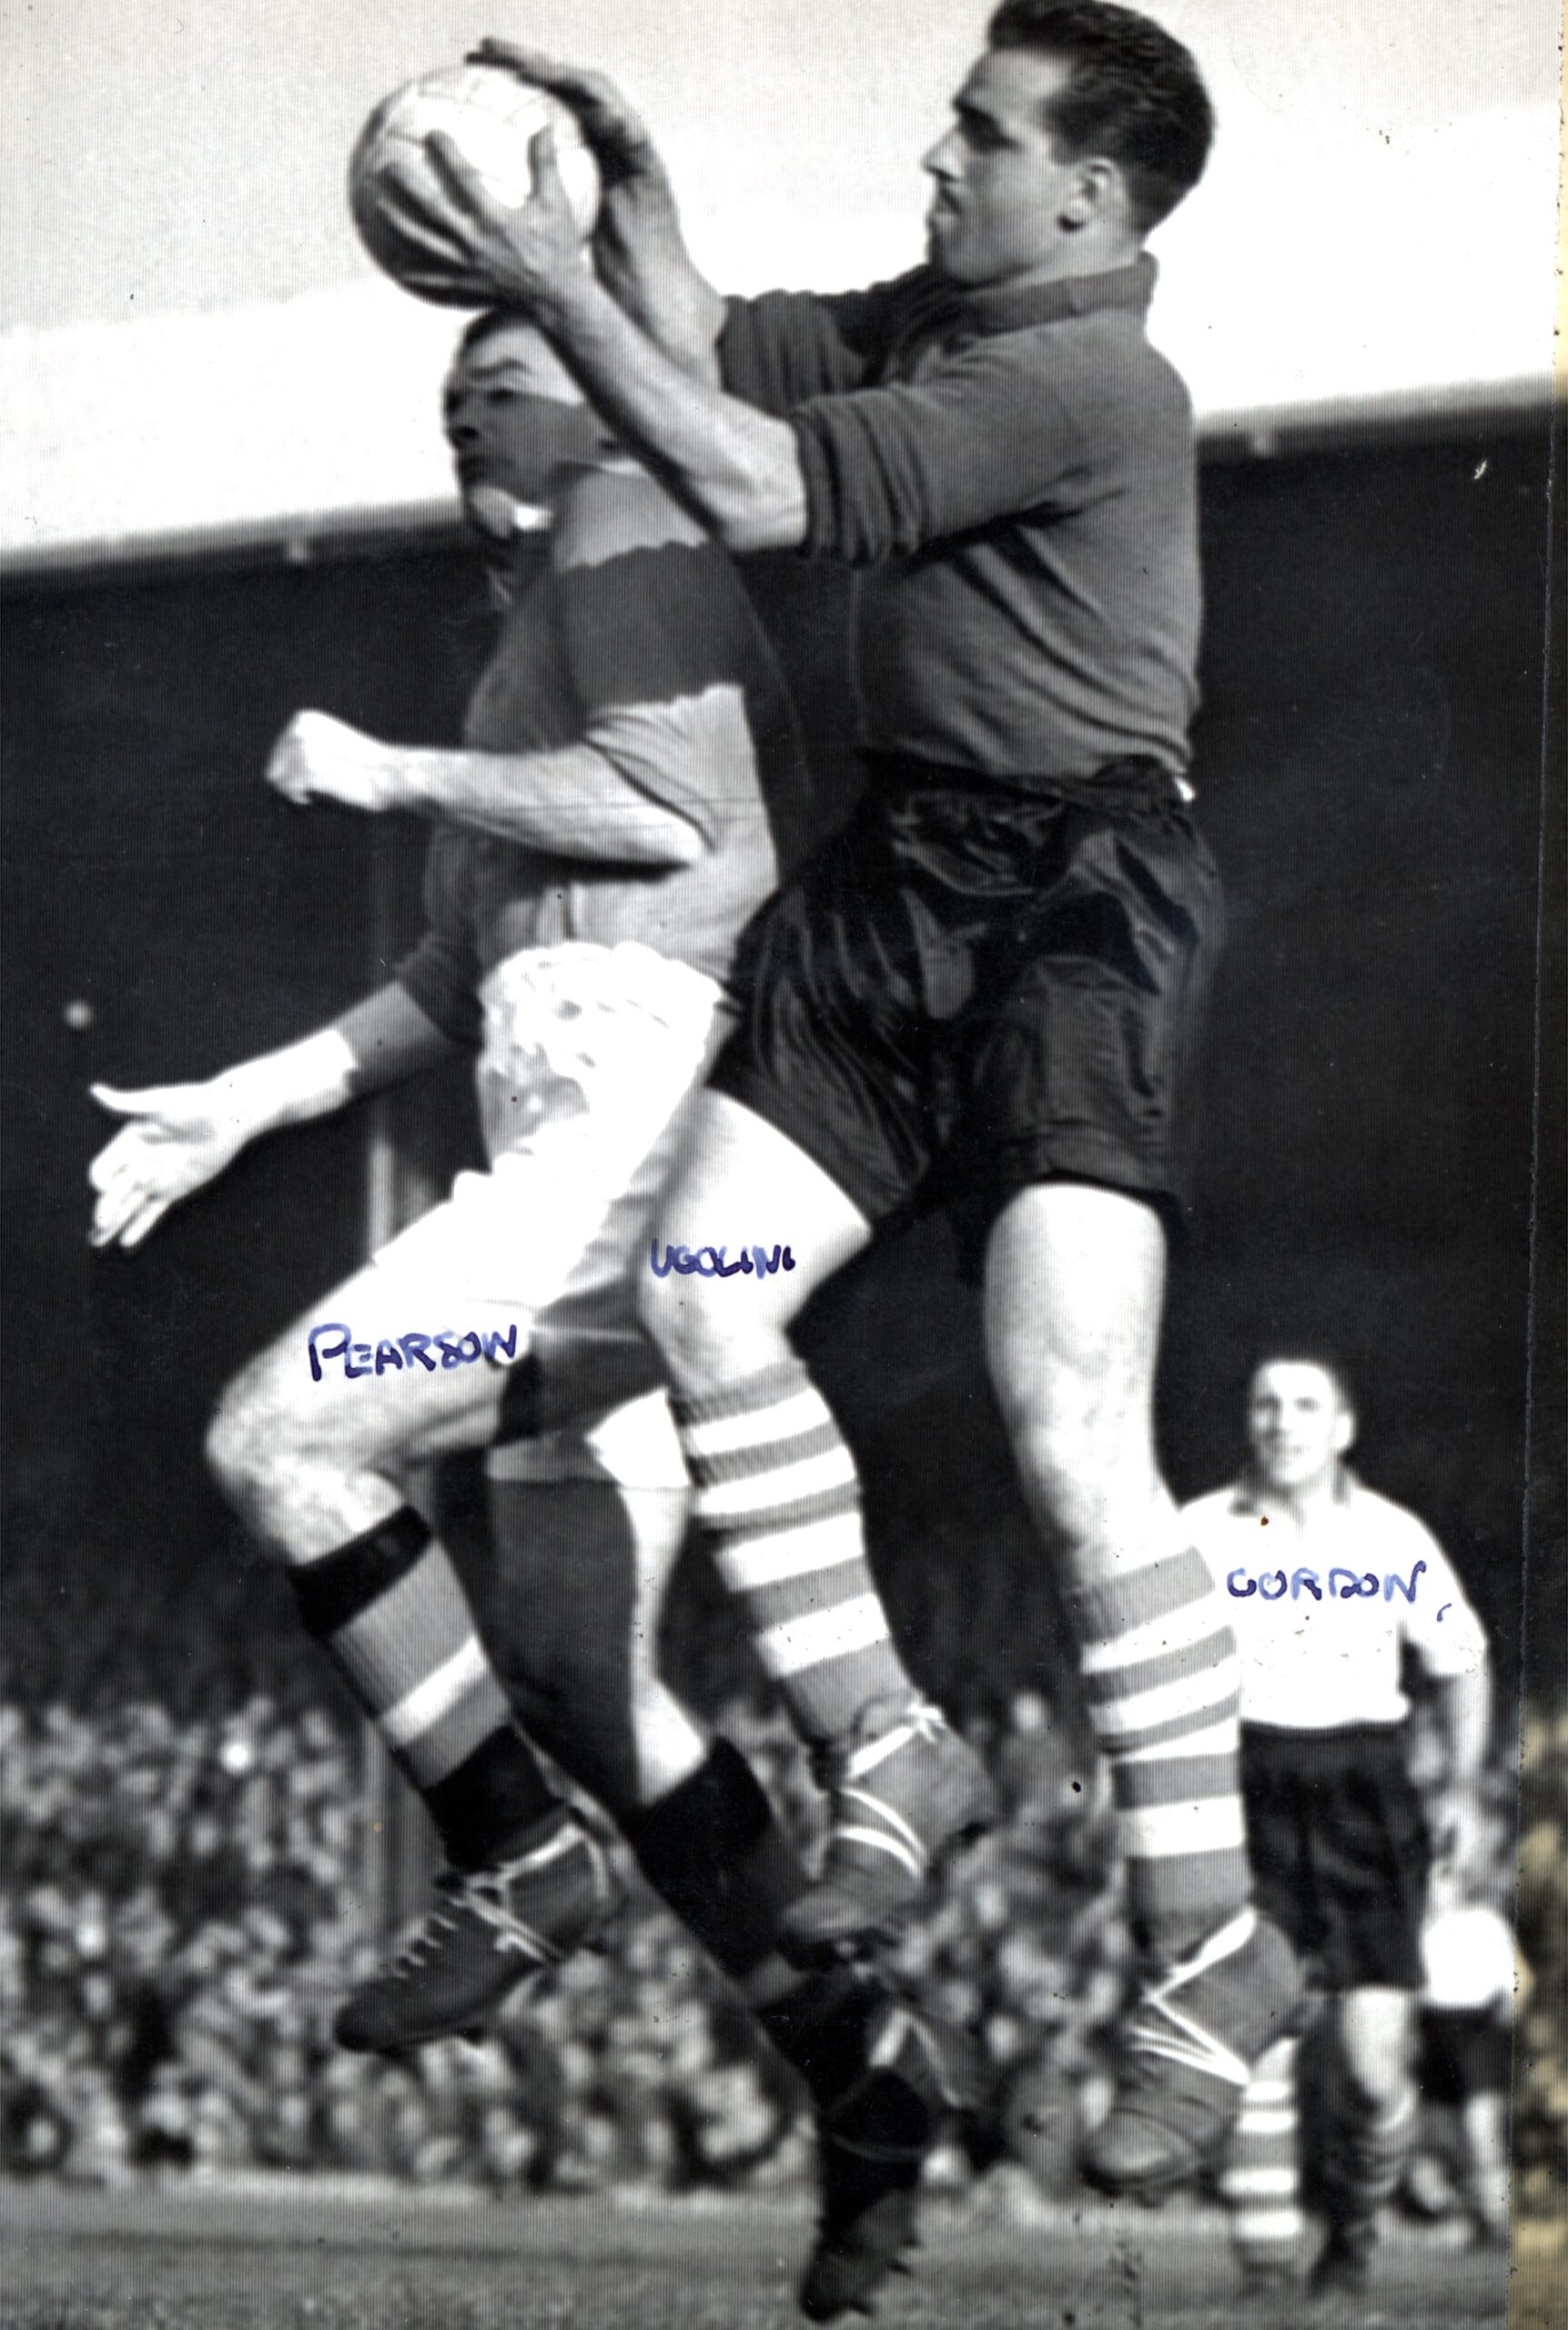 Black and white archive photo of Italian Scot Ugolini catching the ball mid air from a player from the other team. 